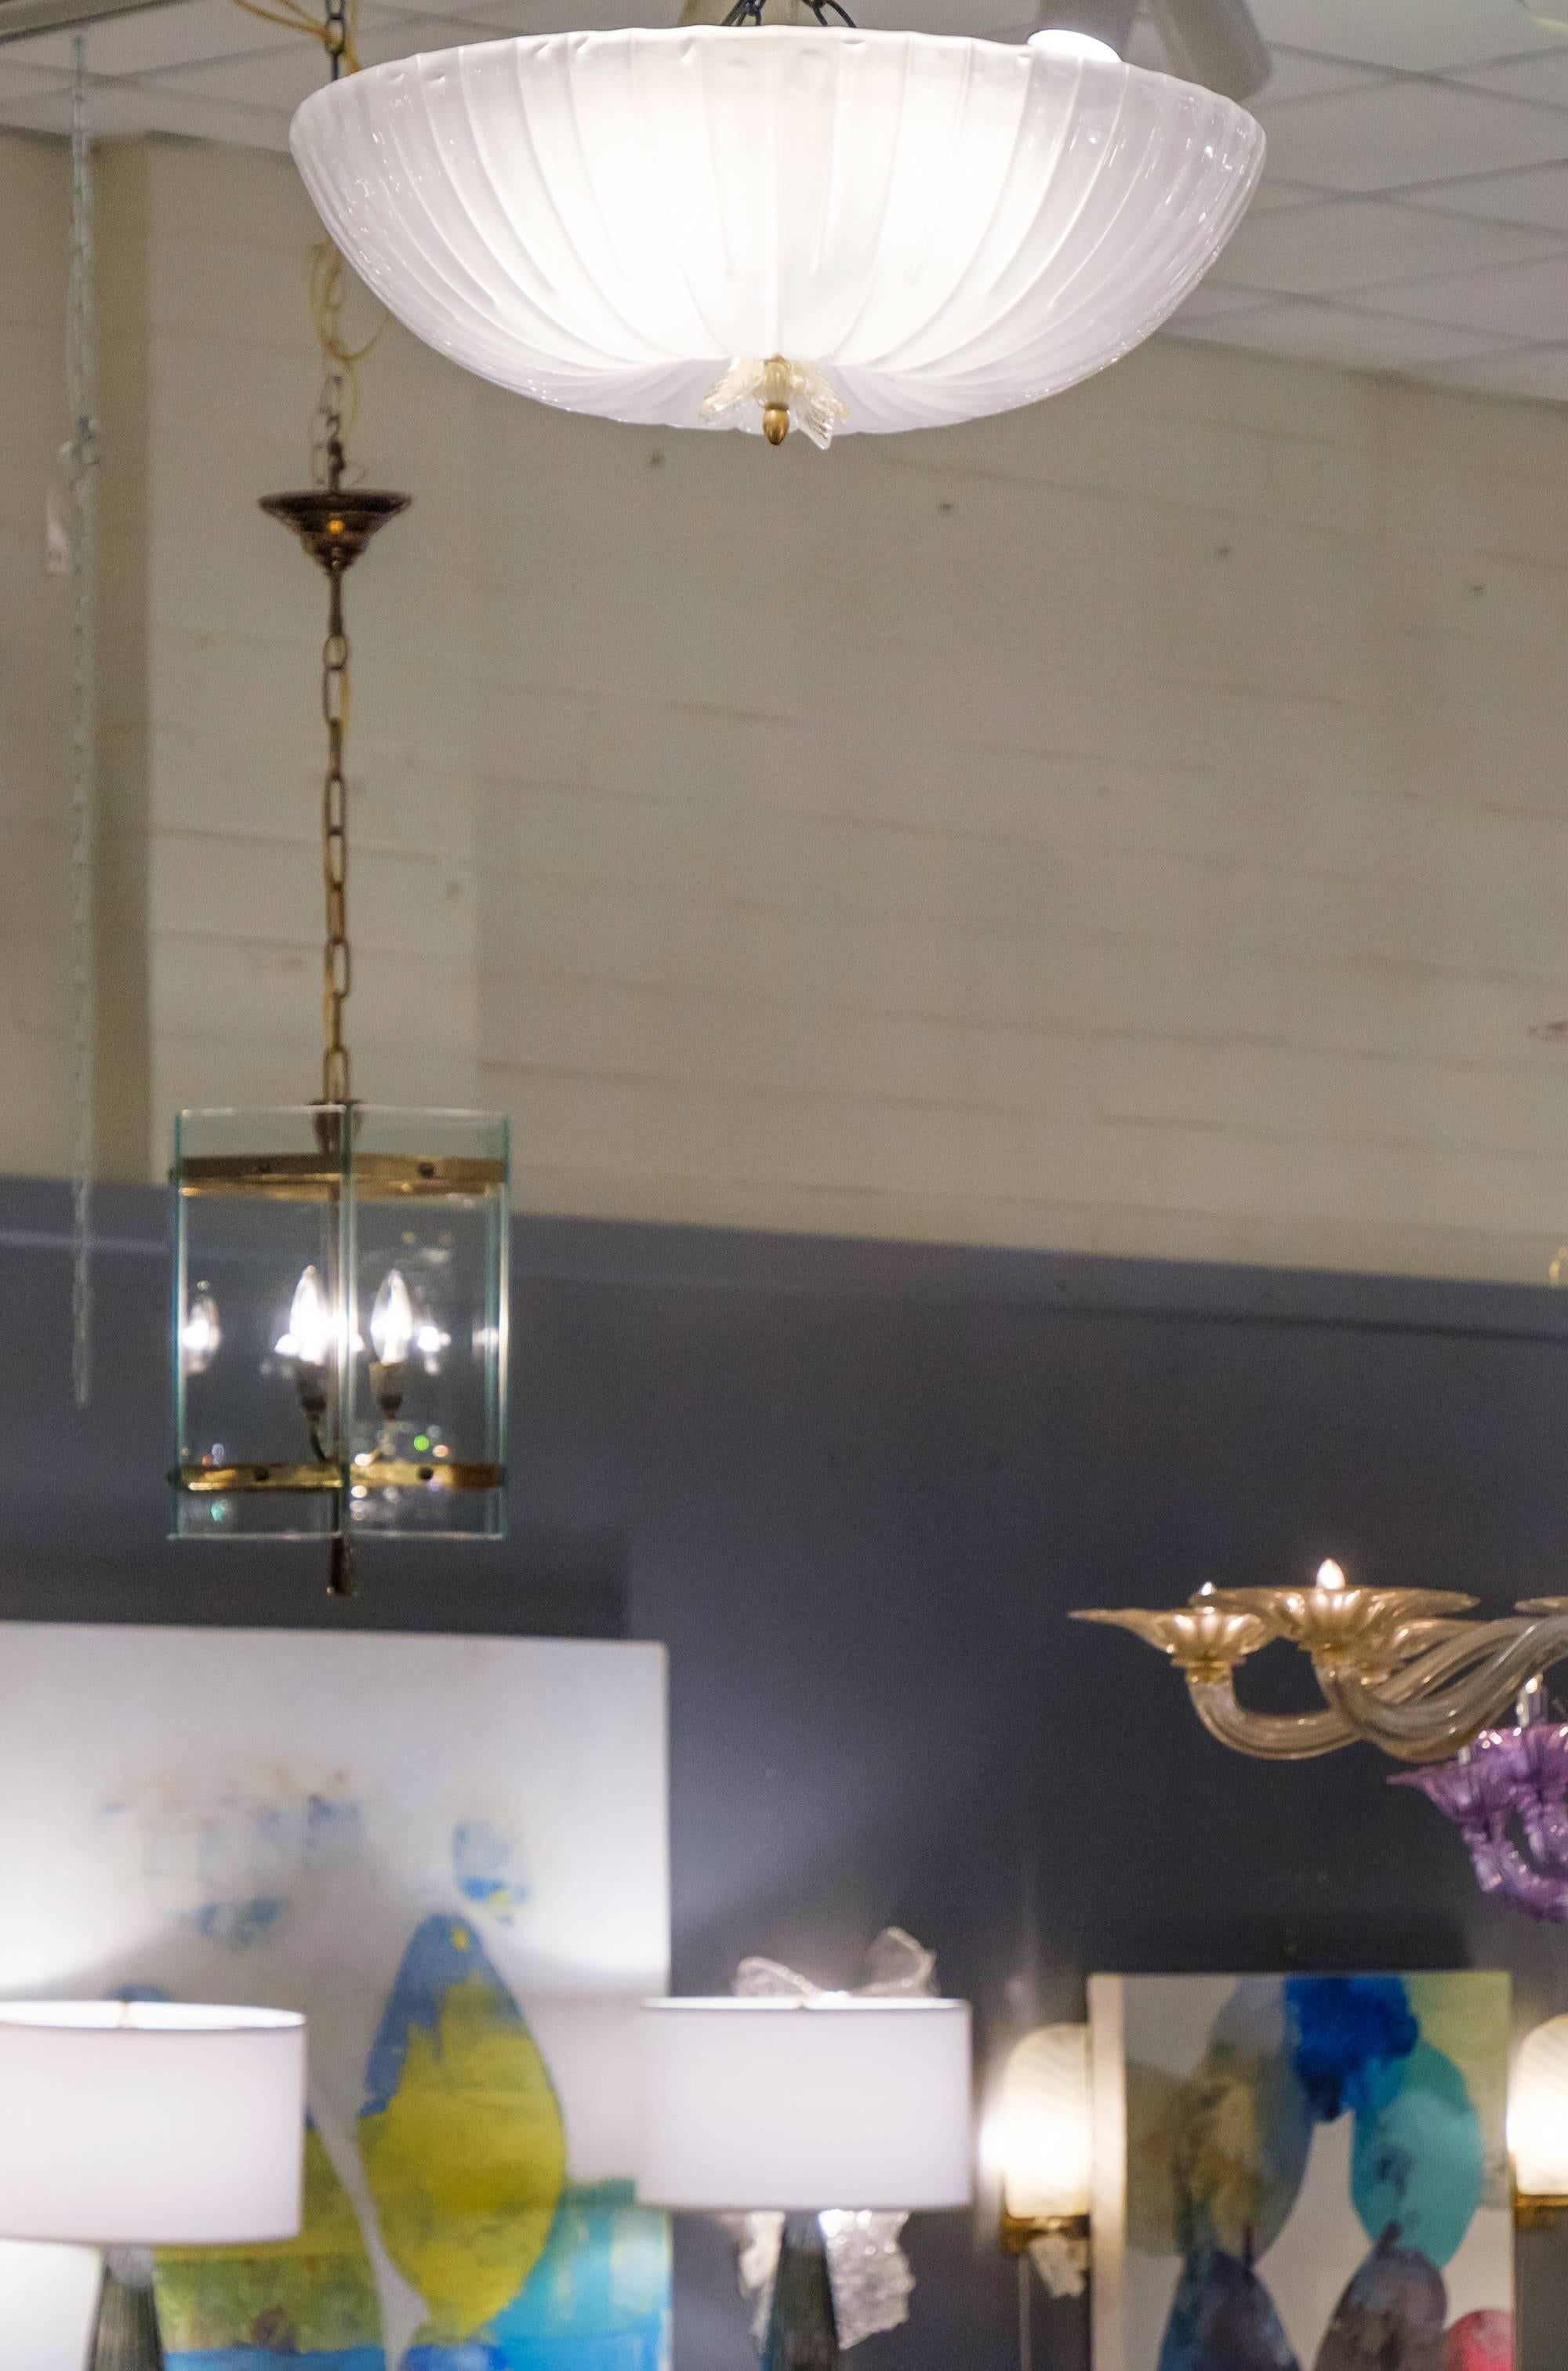 A gorgeous piece handblown in Italy, this Murano glass fluted dome flush mount ceiling fixture has a lovely 23-karat finial detail at the centre. When lit, the light provides a soft ambient, exceptional glow that is distributed evenly throughout the